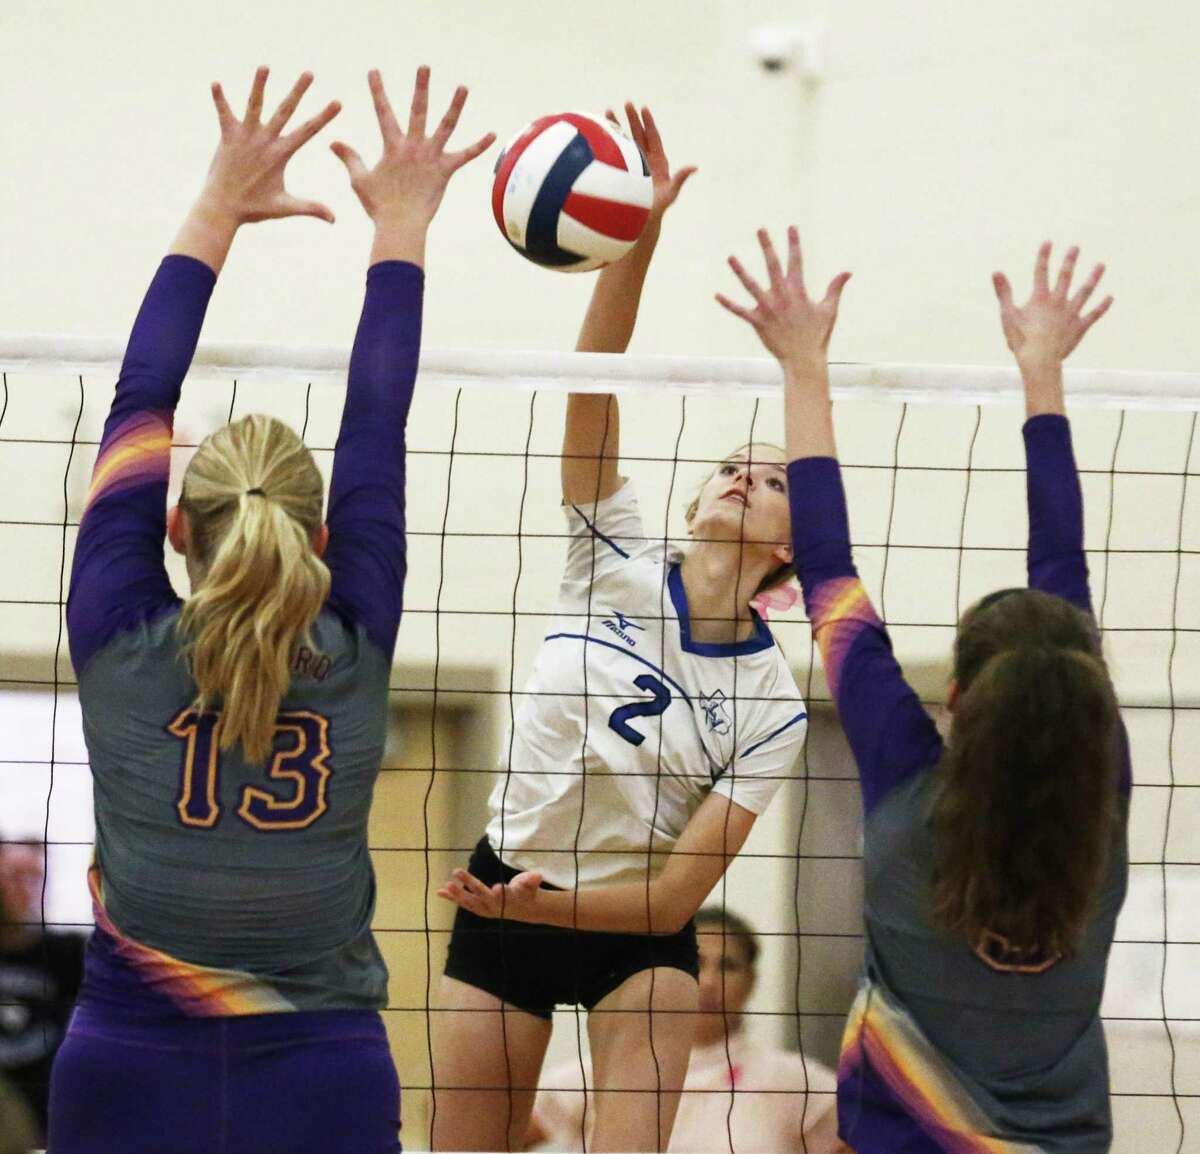 La Vernia's Addison Mulroney (02) gets an opening for a shot against Navarro's Kelly Helms (13) and Allie Benner (05) in girls volleyball in La Vernia on Friday, Oct. 6, 2017. La Vernia won the deciding fifth game for the overall victory. (Kin Man Hui/San Antonio Express-News)